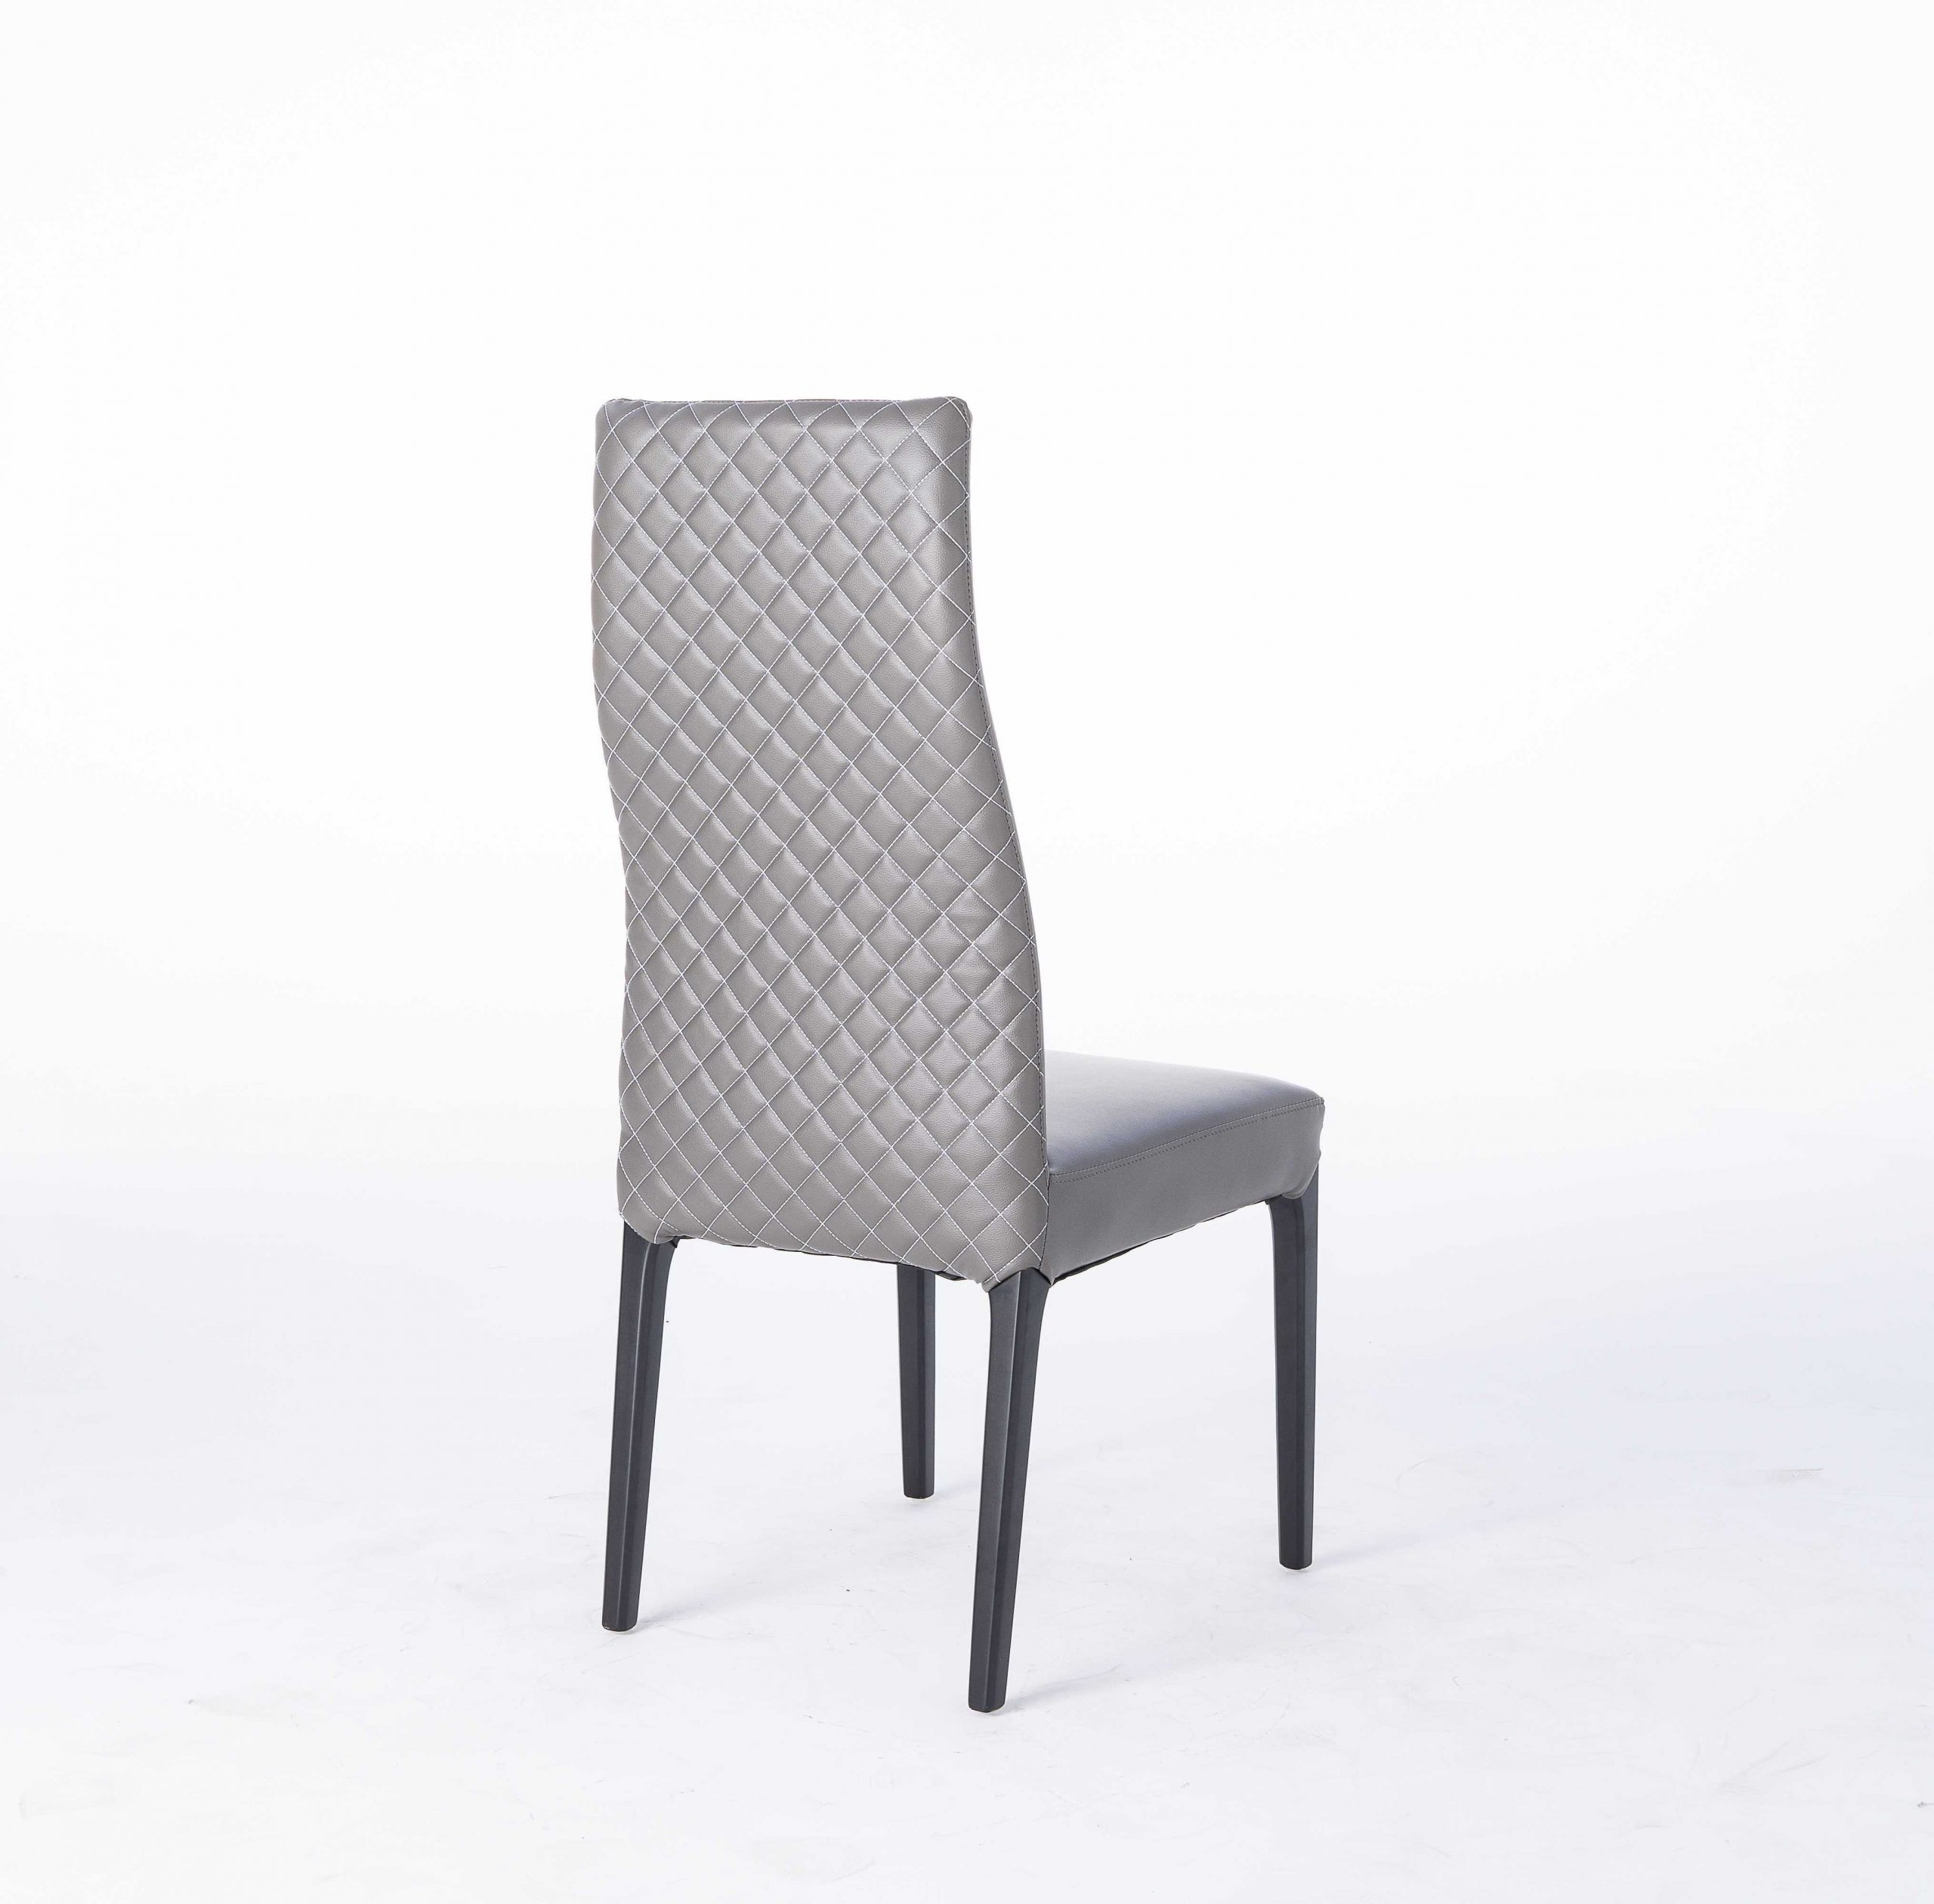 dkf14-1china contemporary modern home furniture kitchen leather fabric dining chair manufacturer (1)